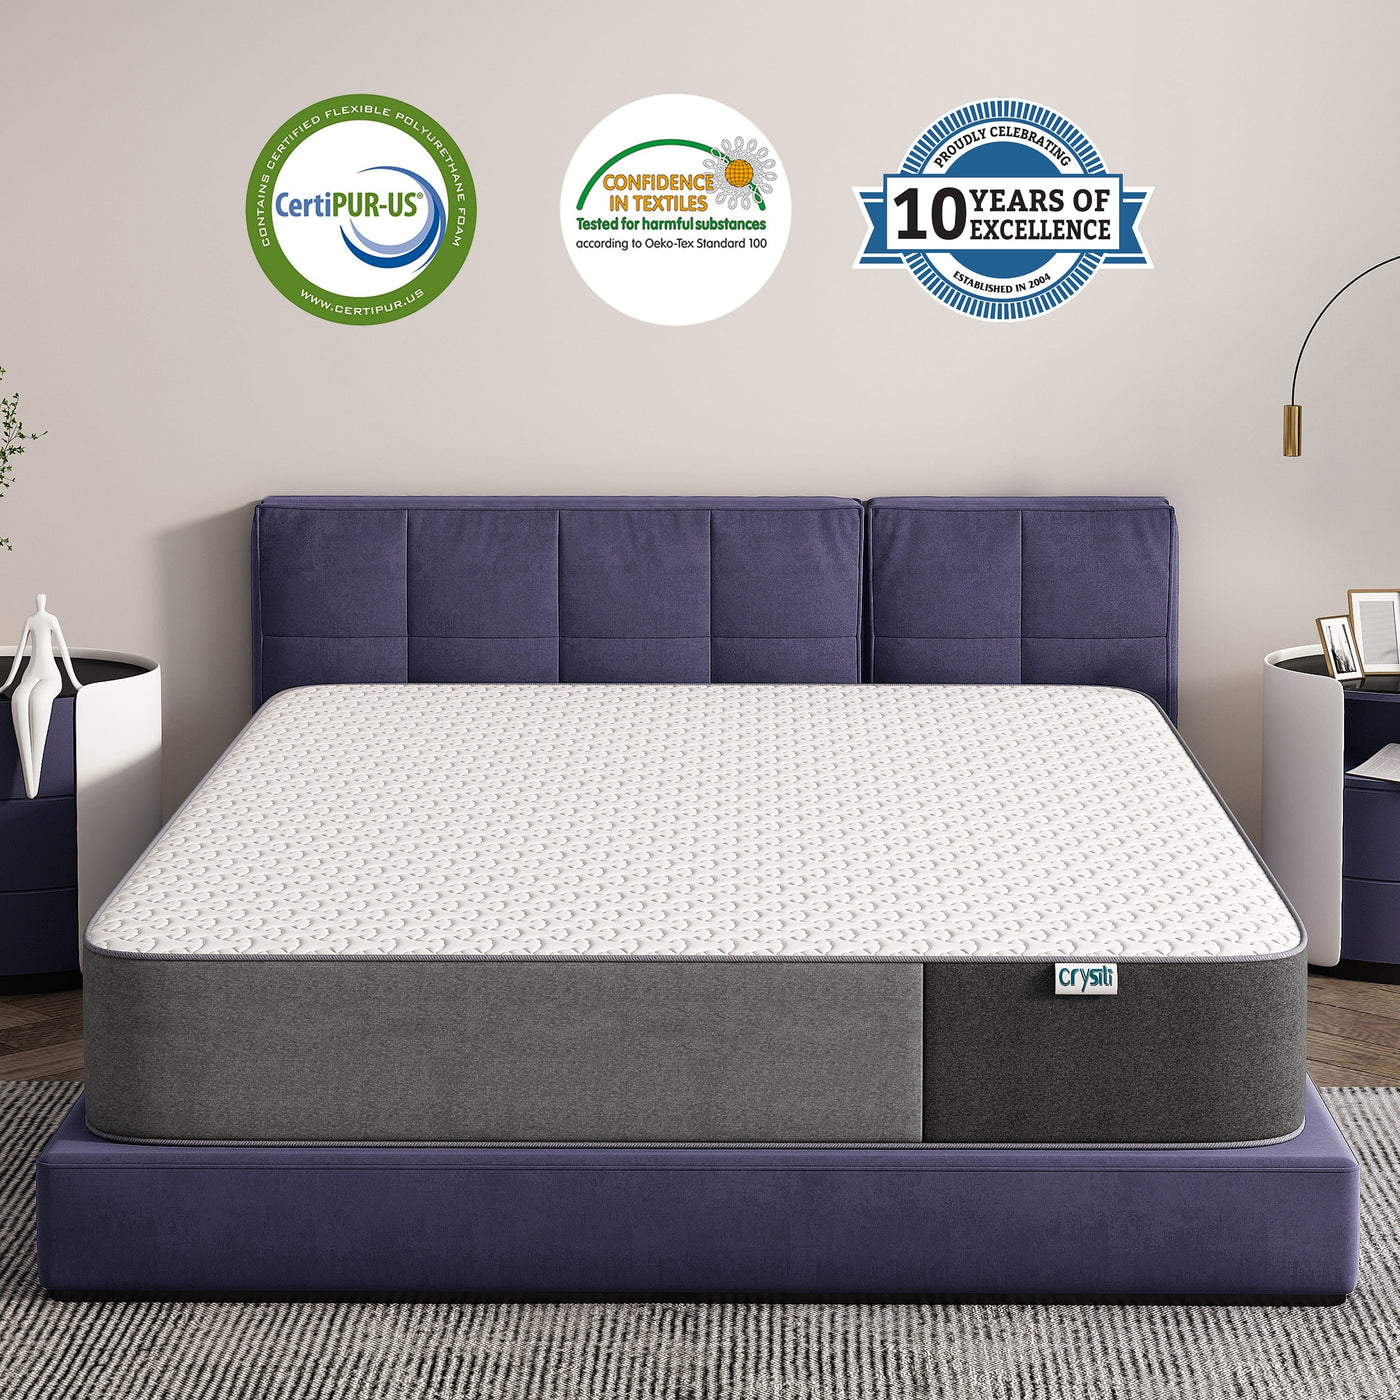 Big Promotion Crystli DC Collection| 8 inch Memory Foam Mattress with CertiPUR-US Certified (CA)